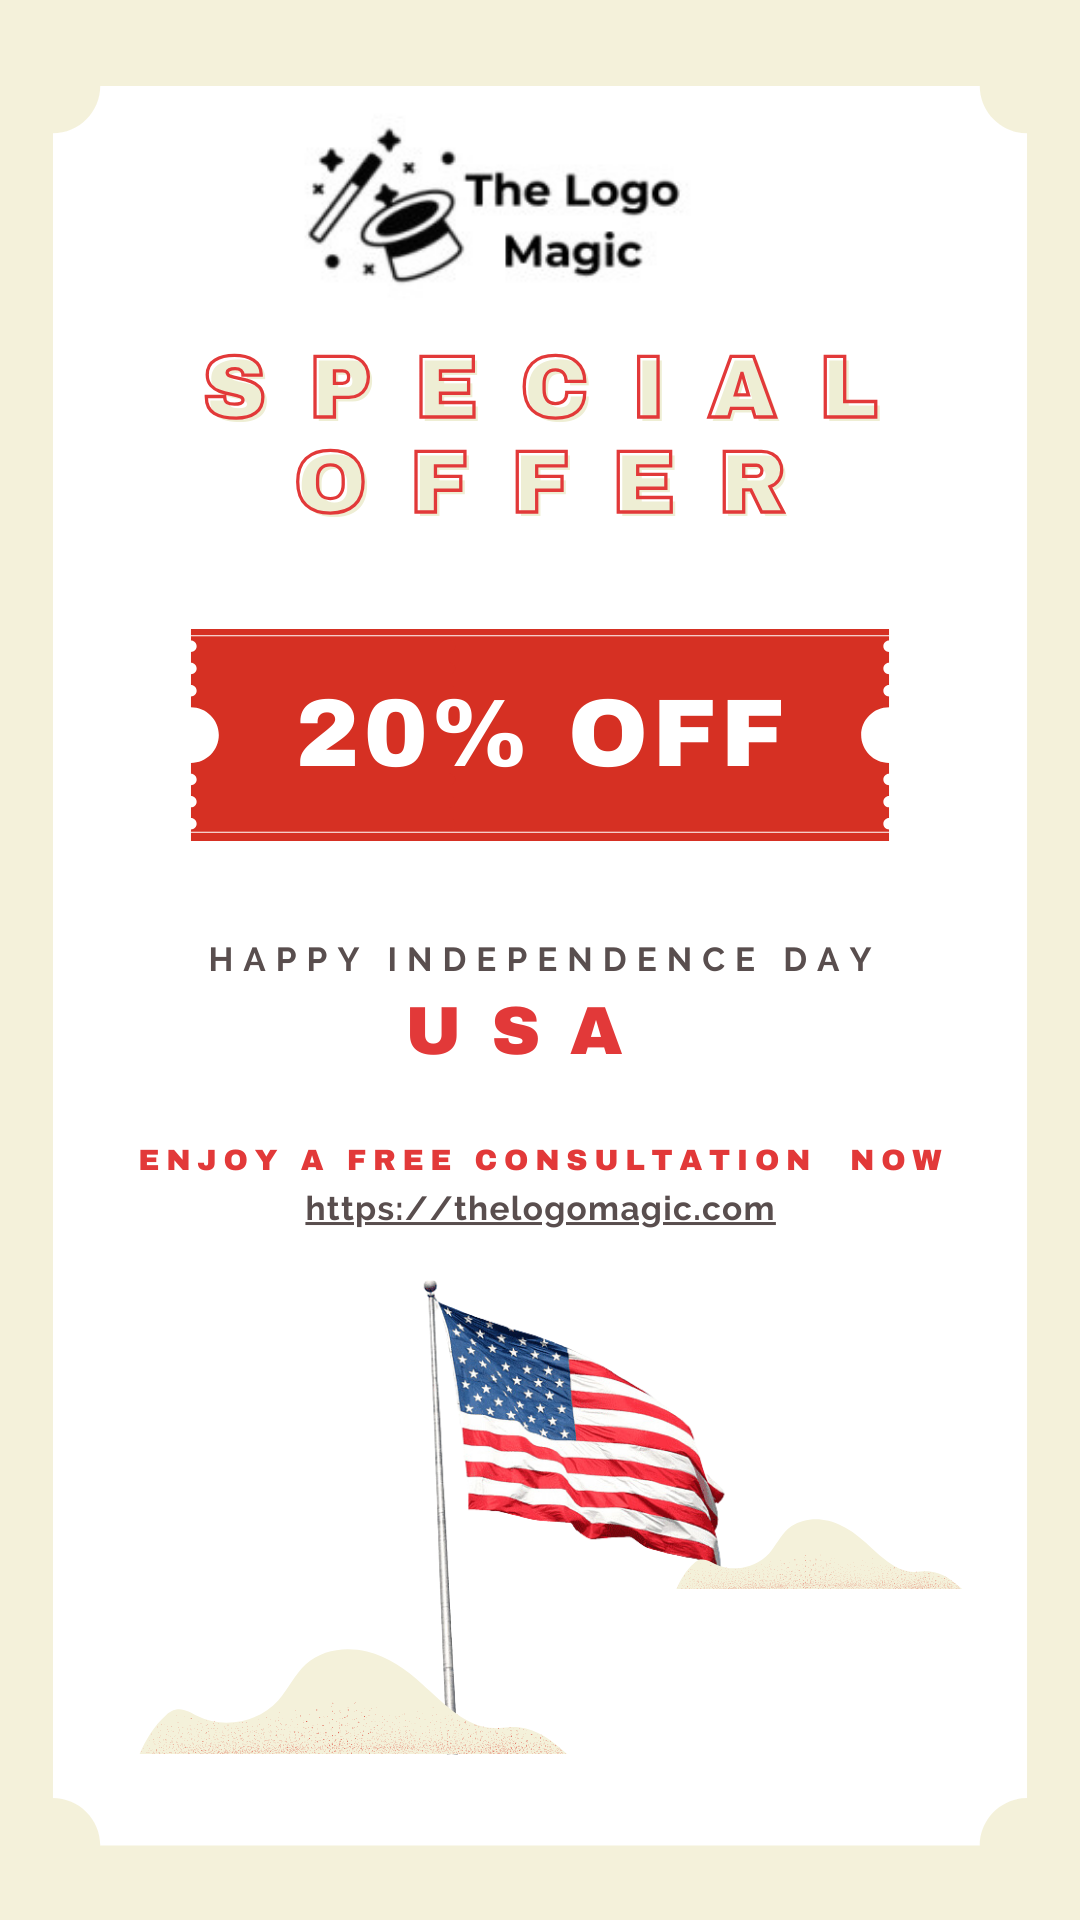 The Logo Magic Launches Services in the USA on Independence Day